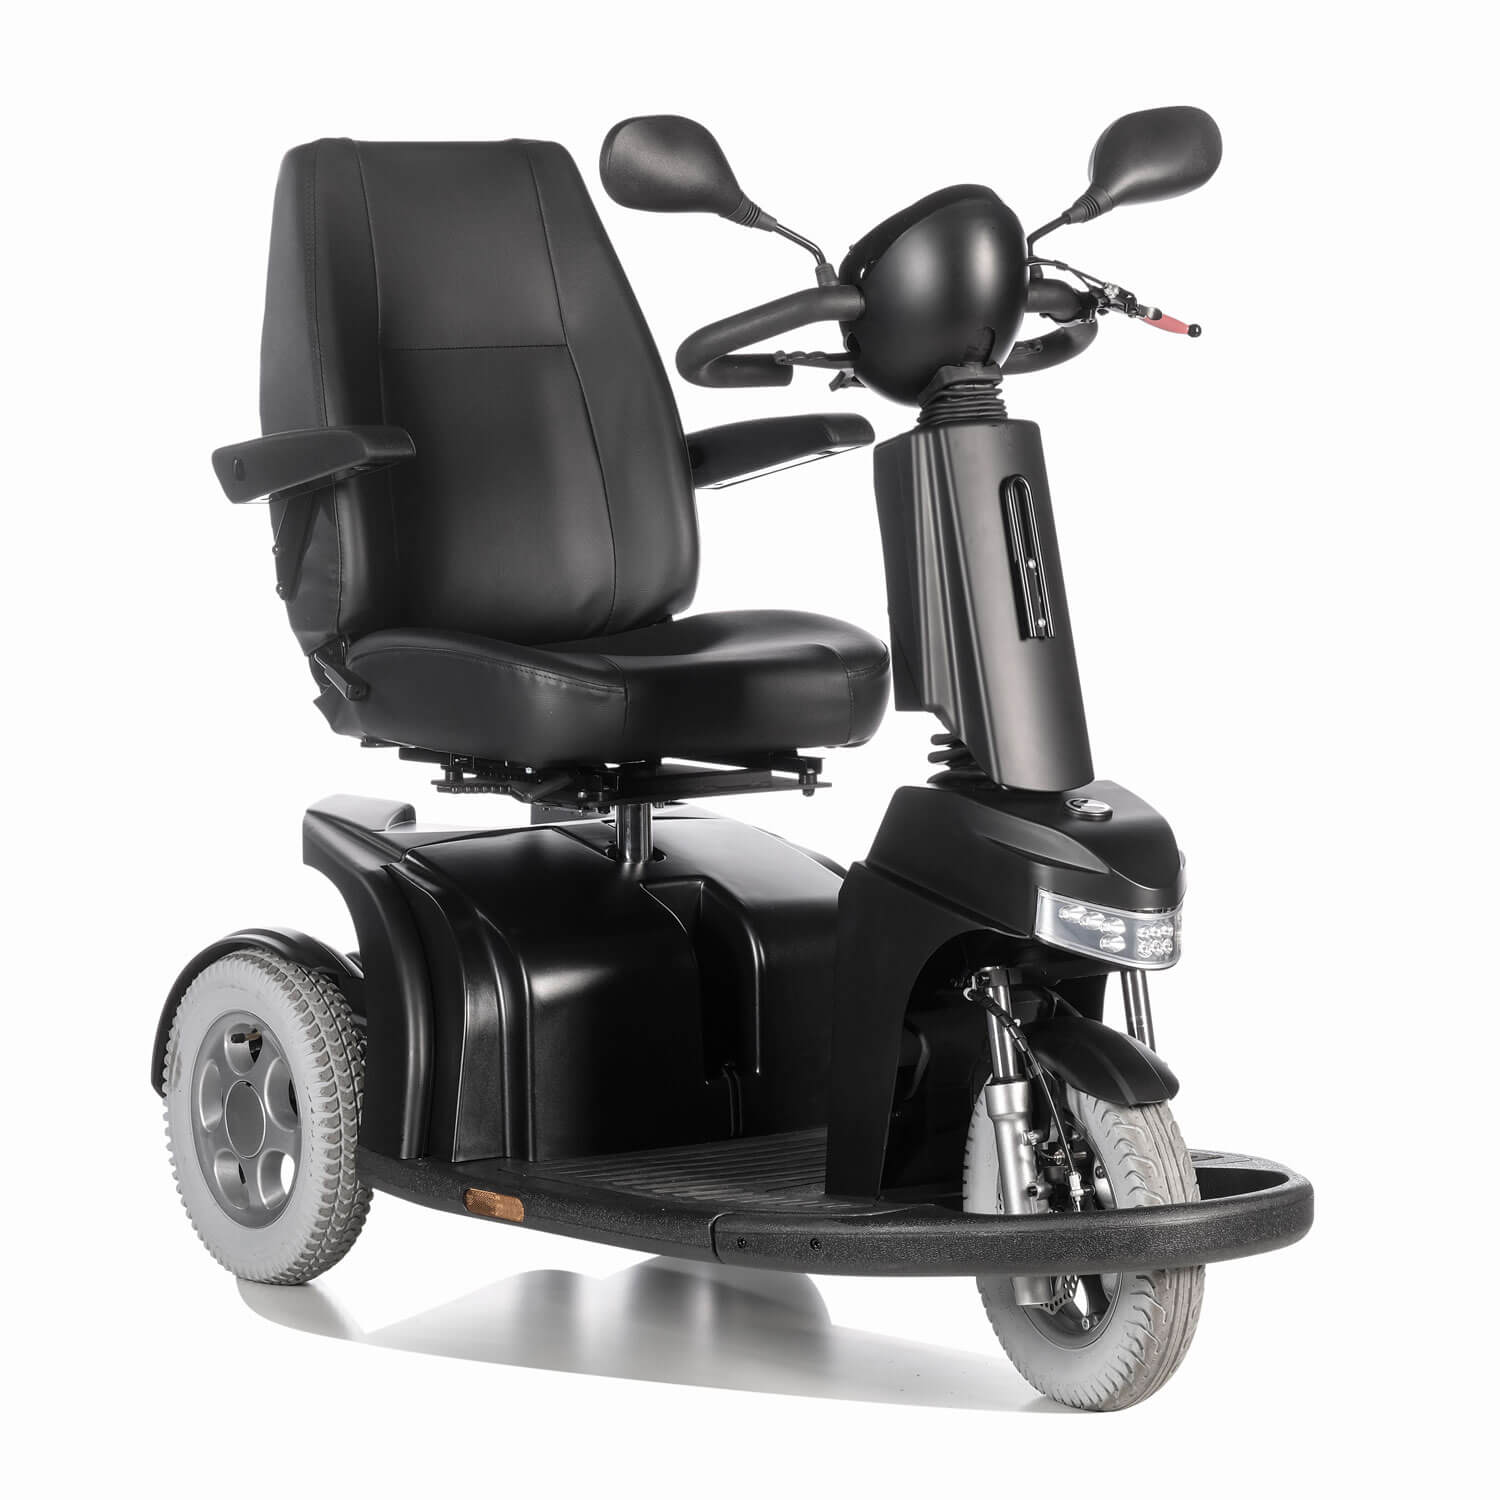 STERLING Elite² Plus Class 3 Mobility Scooter